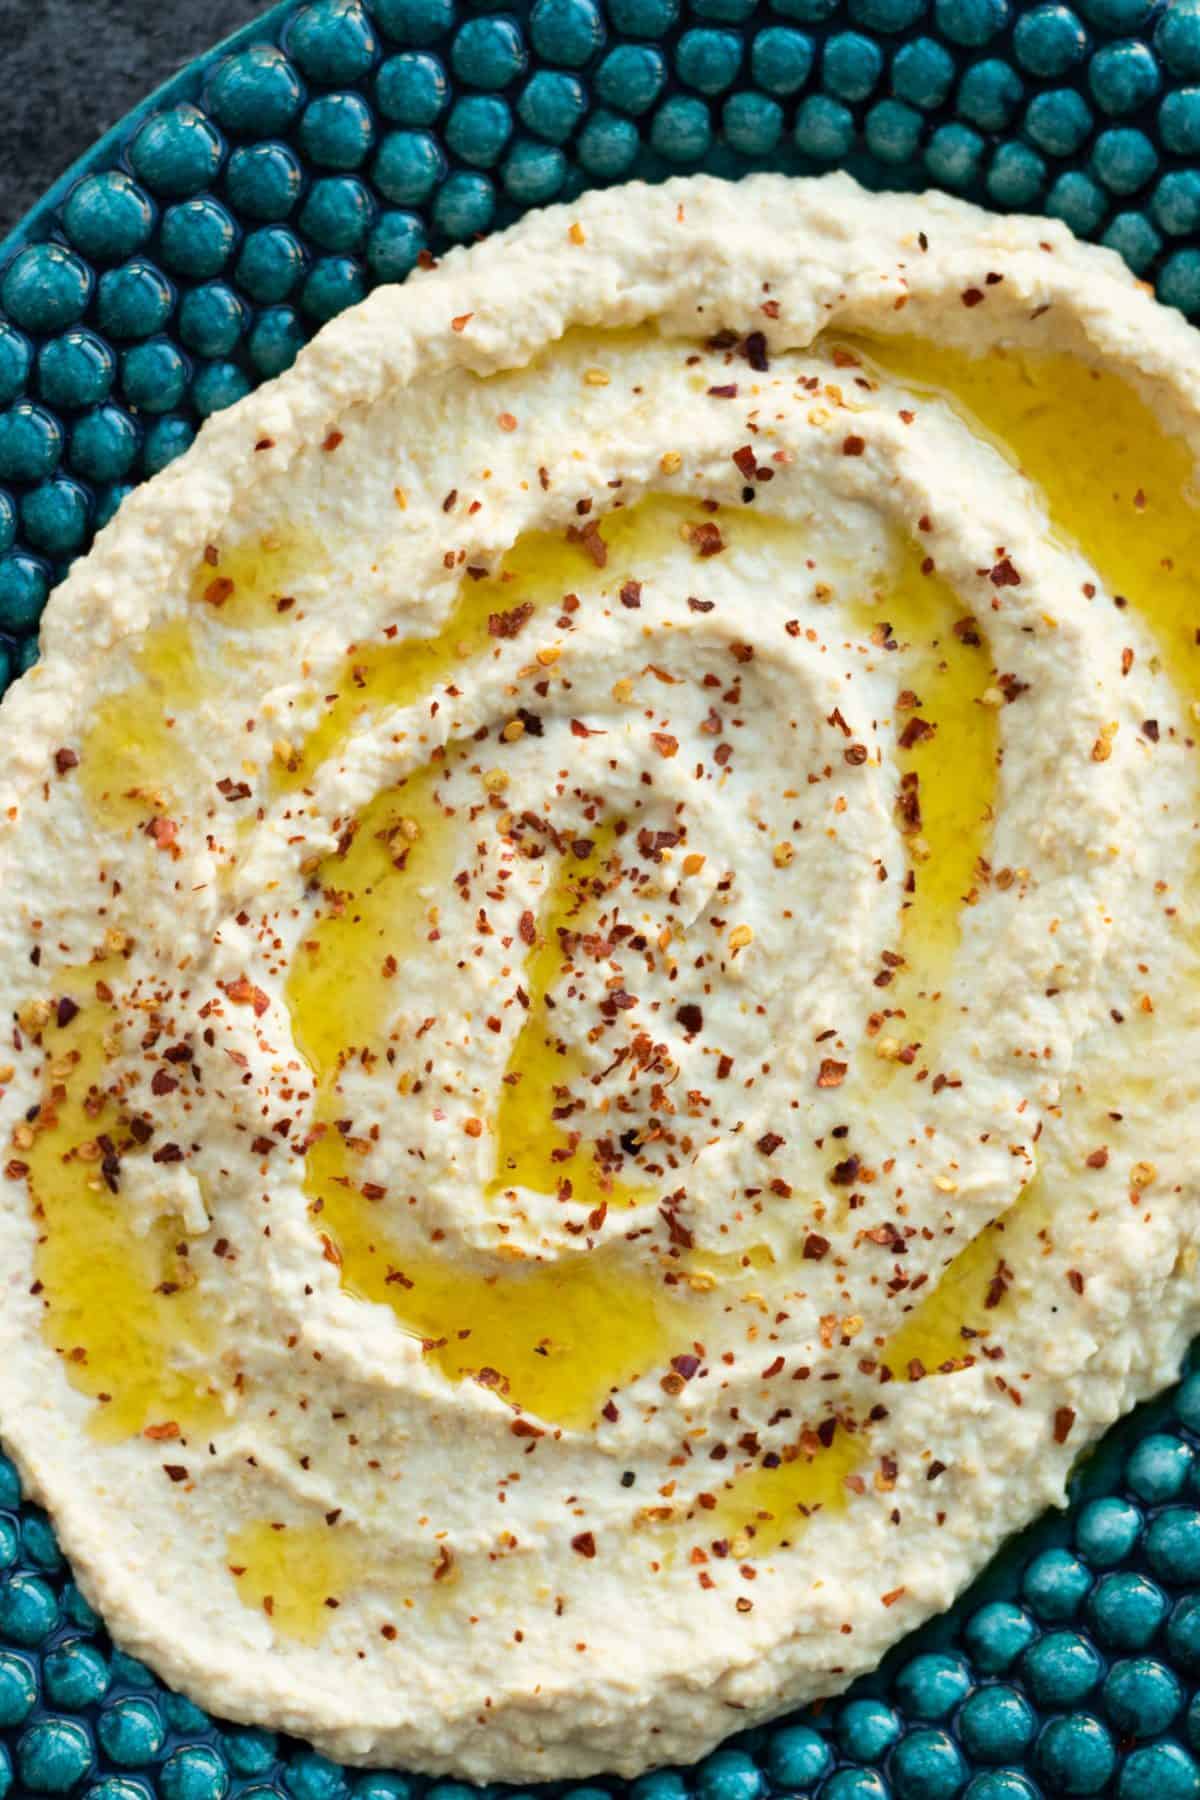 top down view of hummus topped with olive and chili flakes, on top of a blue-green plate